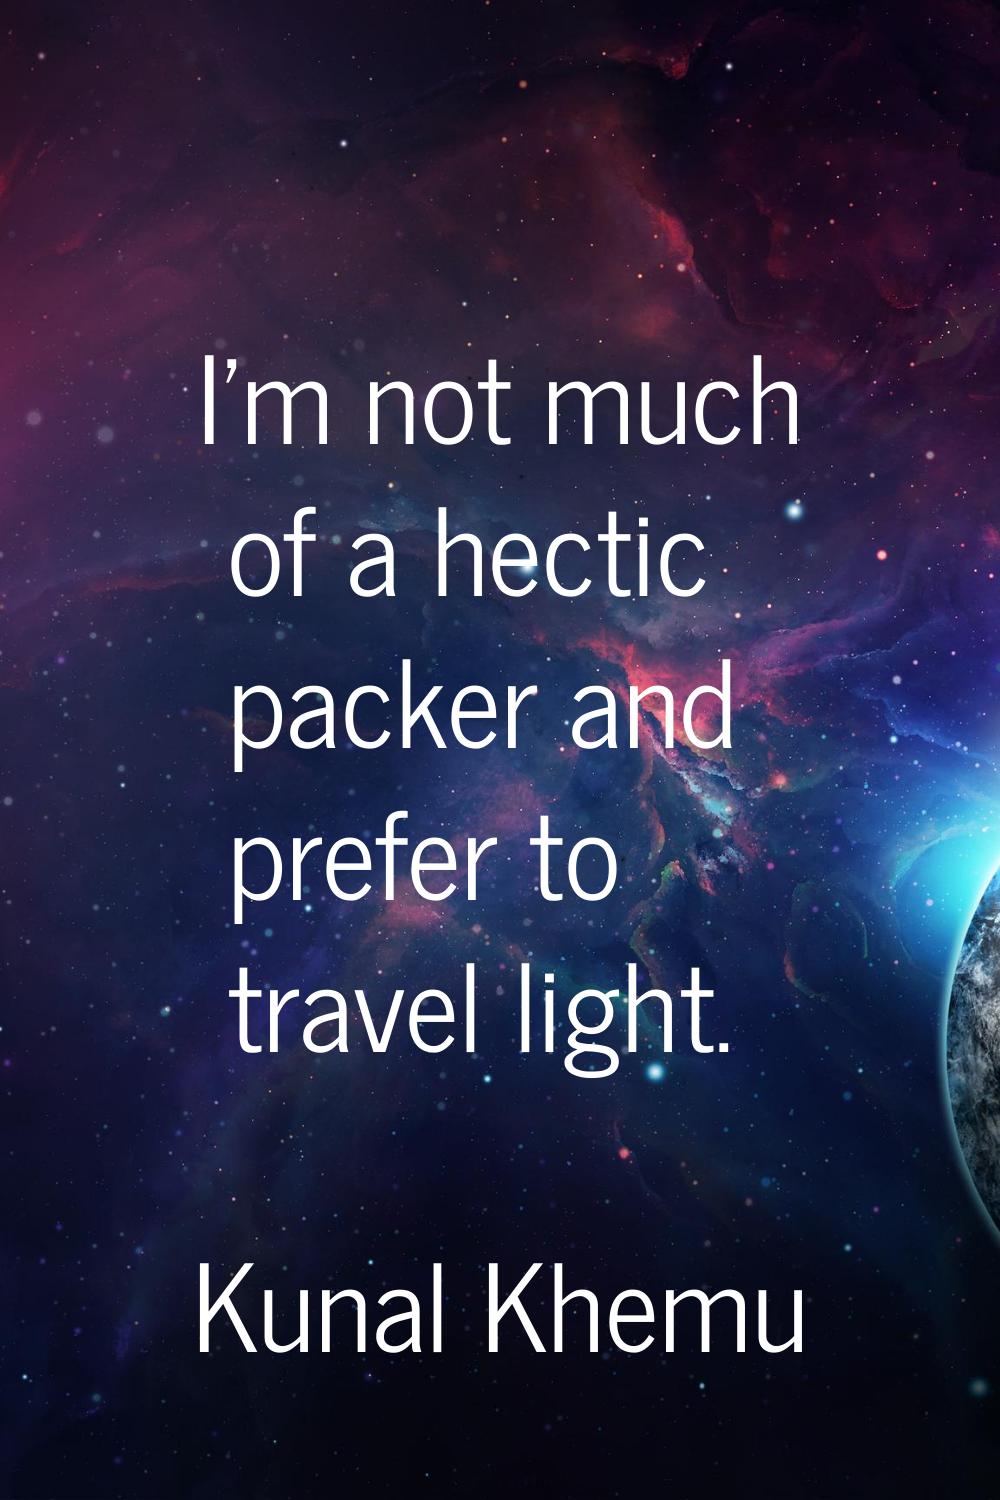 I'm not much of a hectic packer and prefer to travel light.